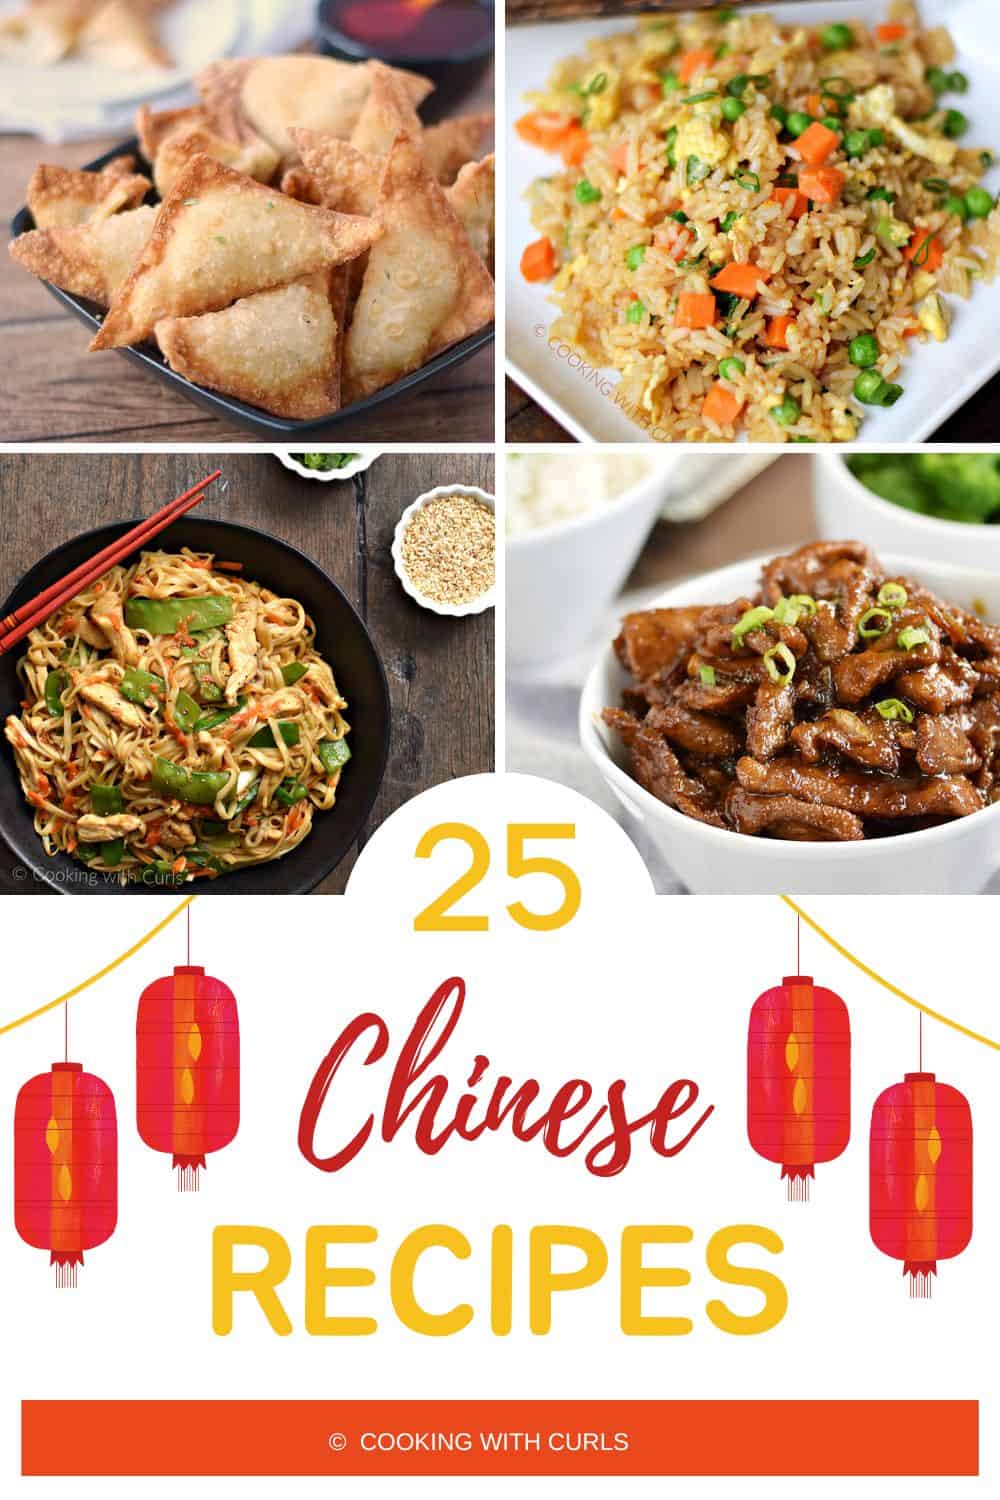 25 Chinese Recipes collage with images of crab rangoons, mongolian beef, almond cookies, and chicken chow mein with title graphic across the bottom.